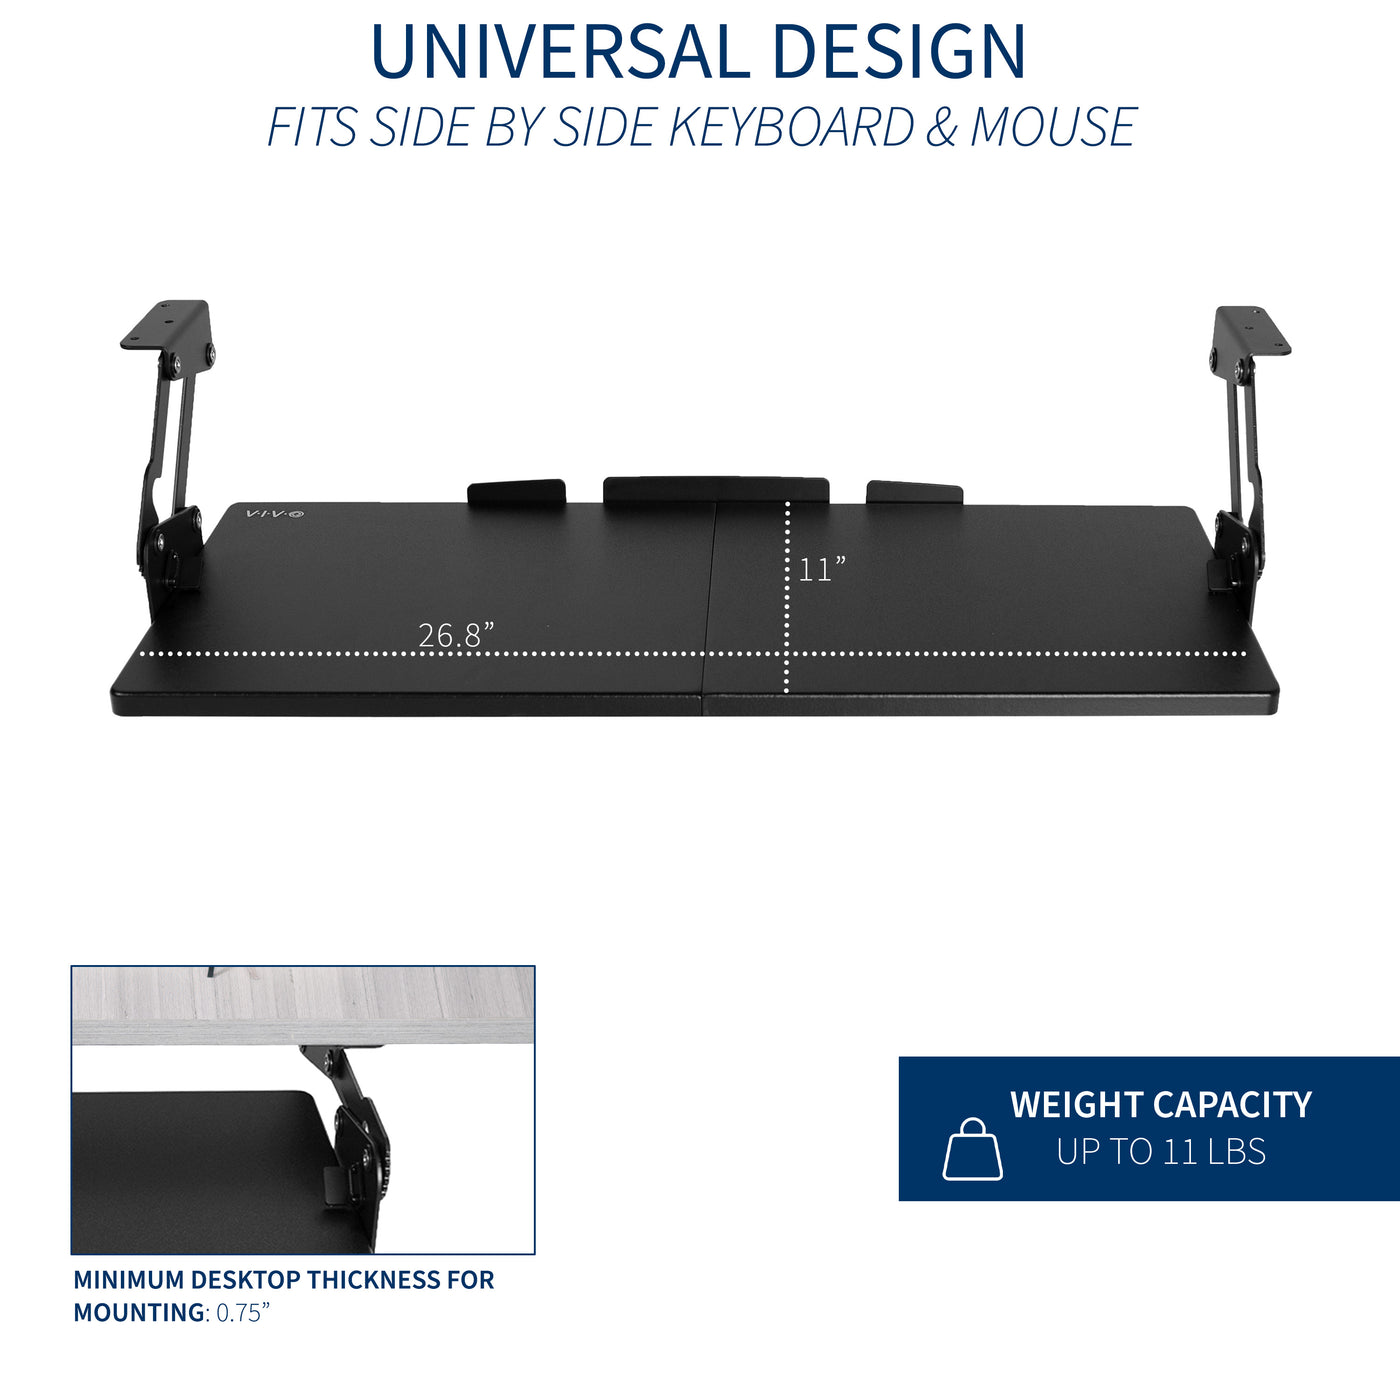 Universal design that fits any keyboard and mouse side by side with a hefty weight capacity.